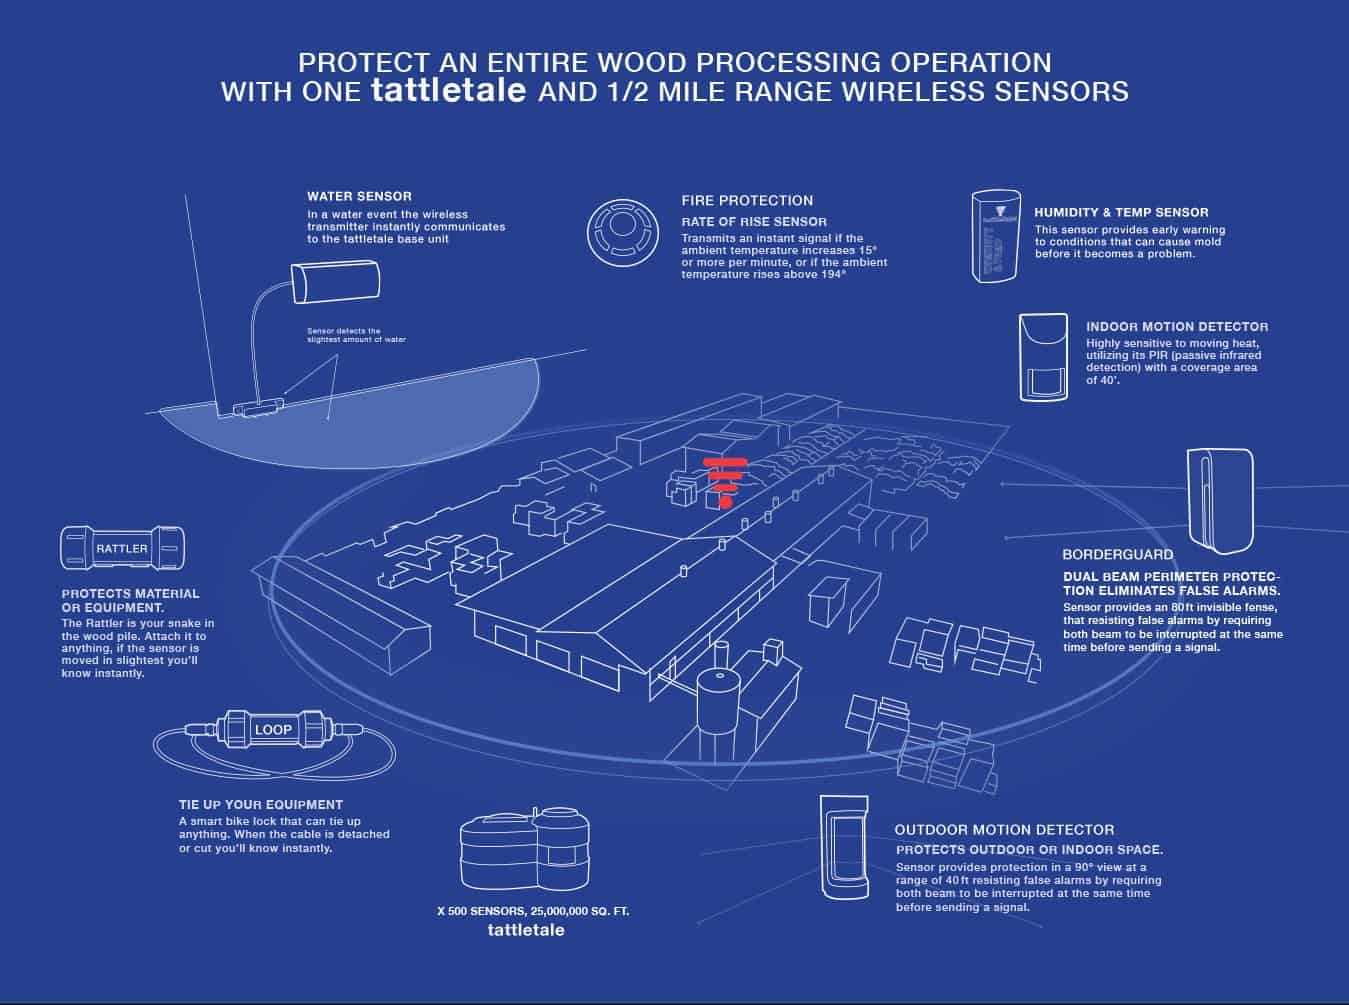 protect an entire wood processing operation with one tattletale and 1/2 mile range wireless sensors